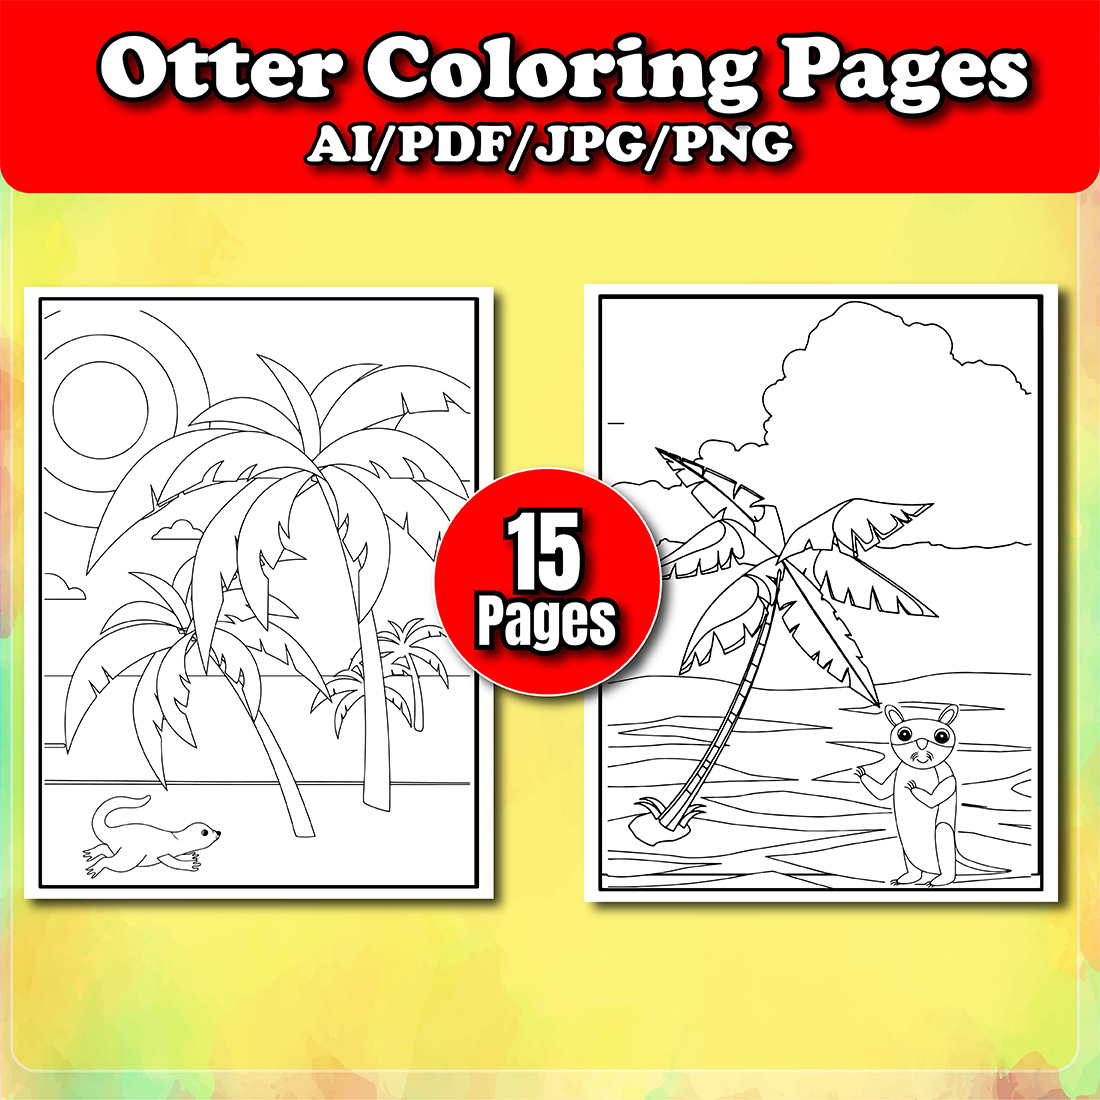 preview image Otter Coloring Pages.